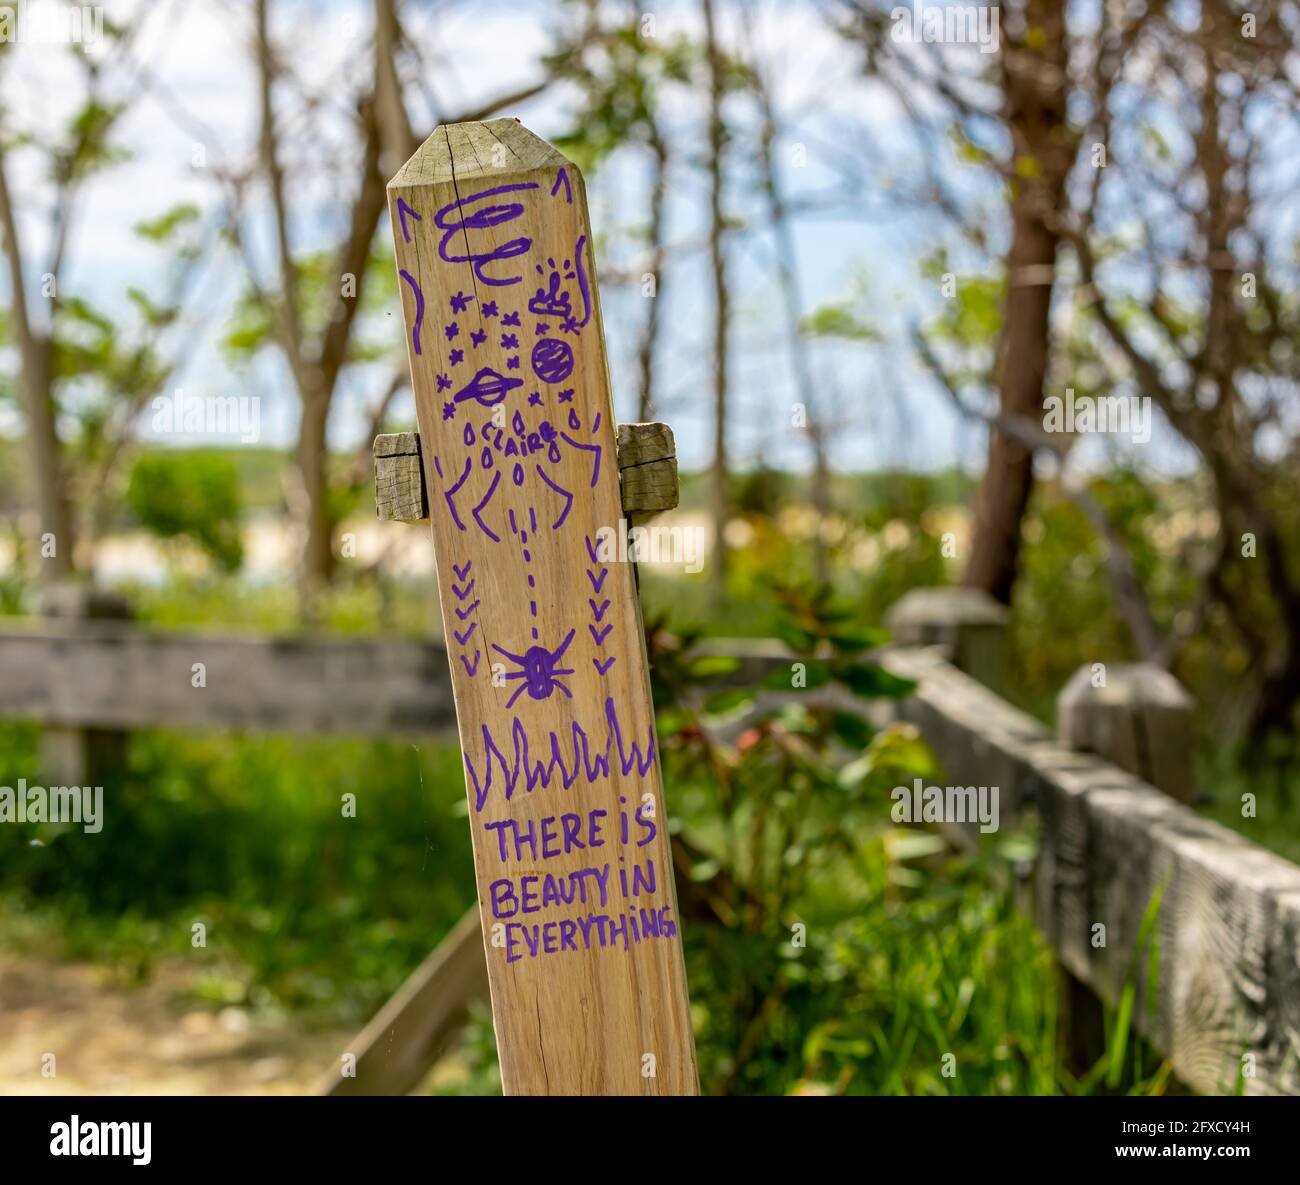 'There is beauty in everything' written in purple in with an illustration on wood post in East Hampton, NY Stock Photo